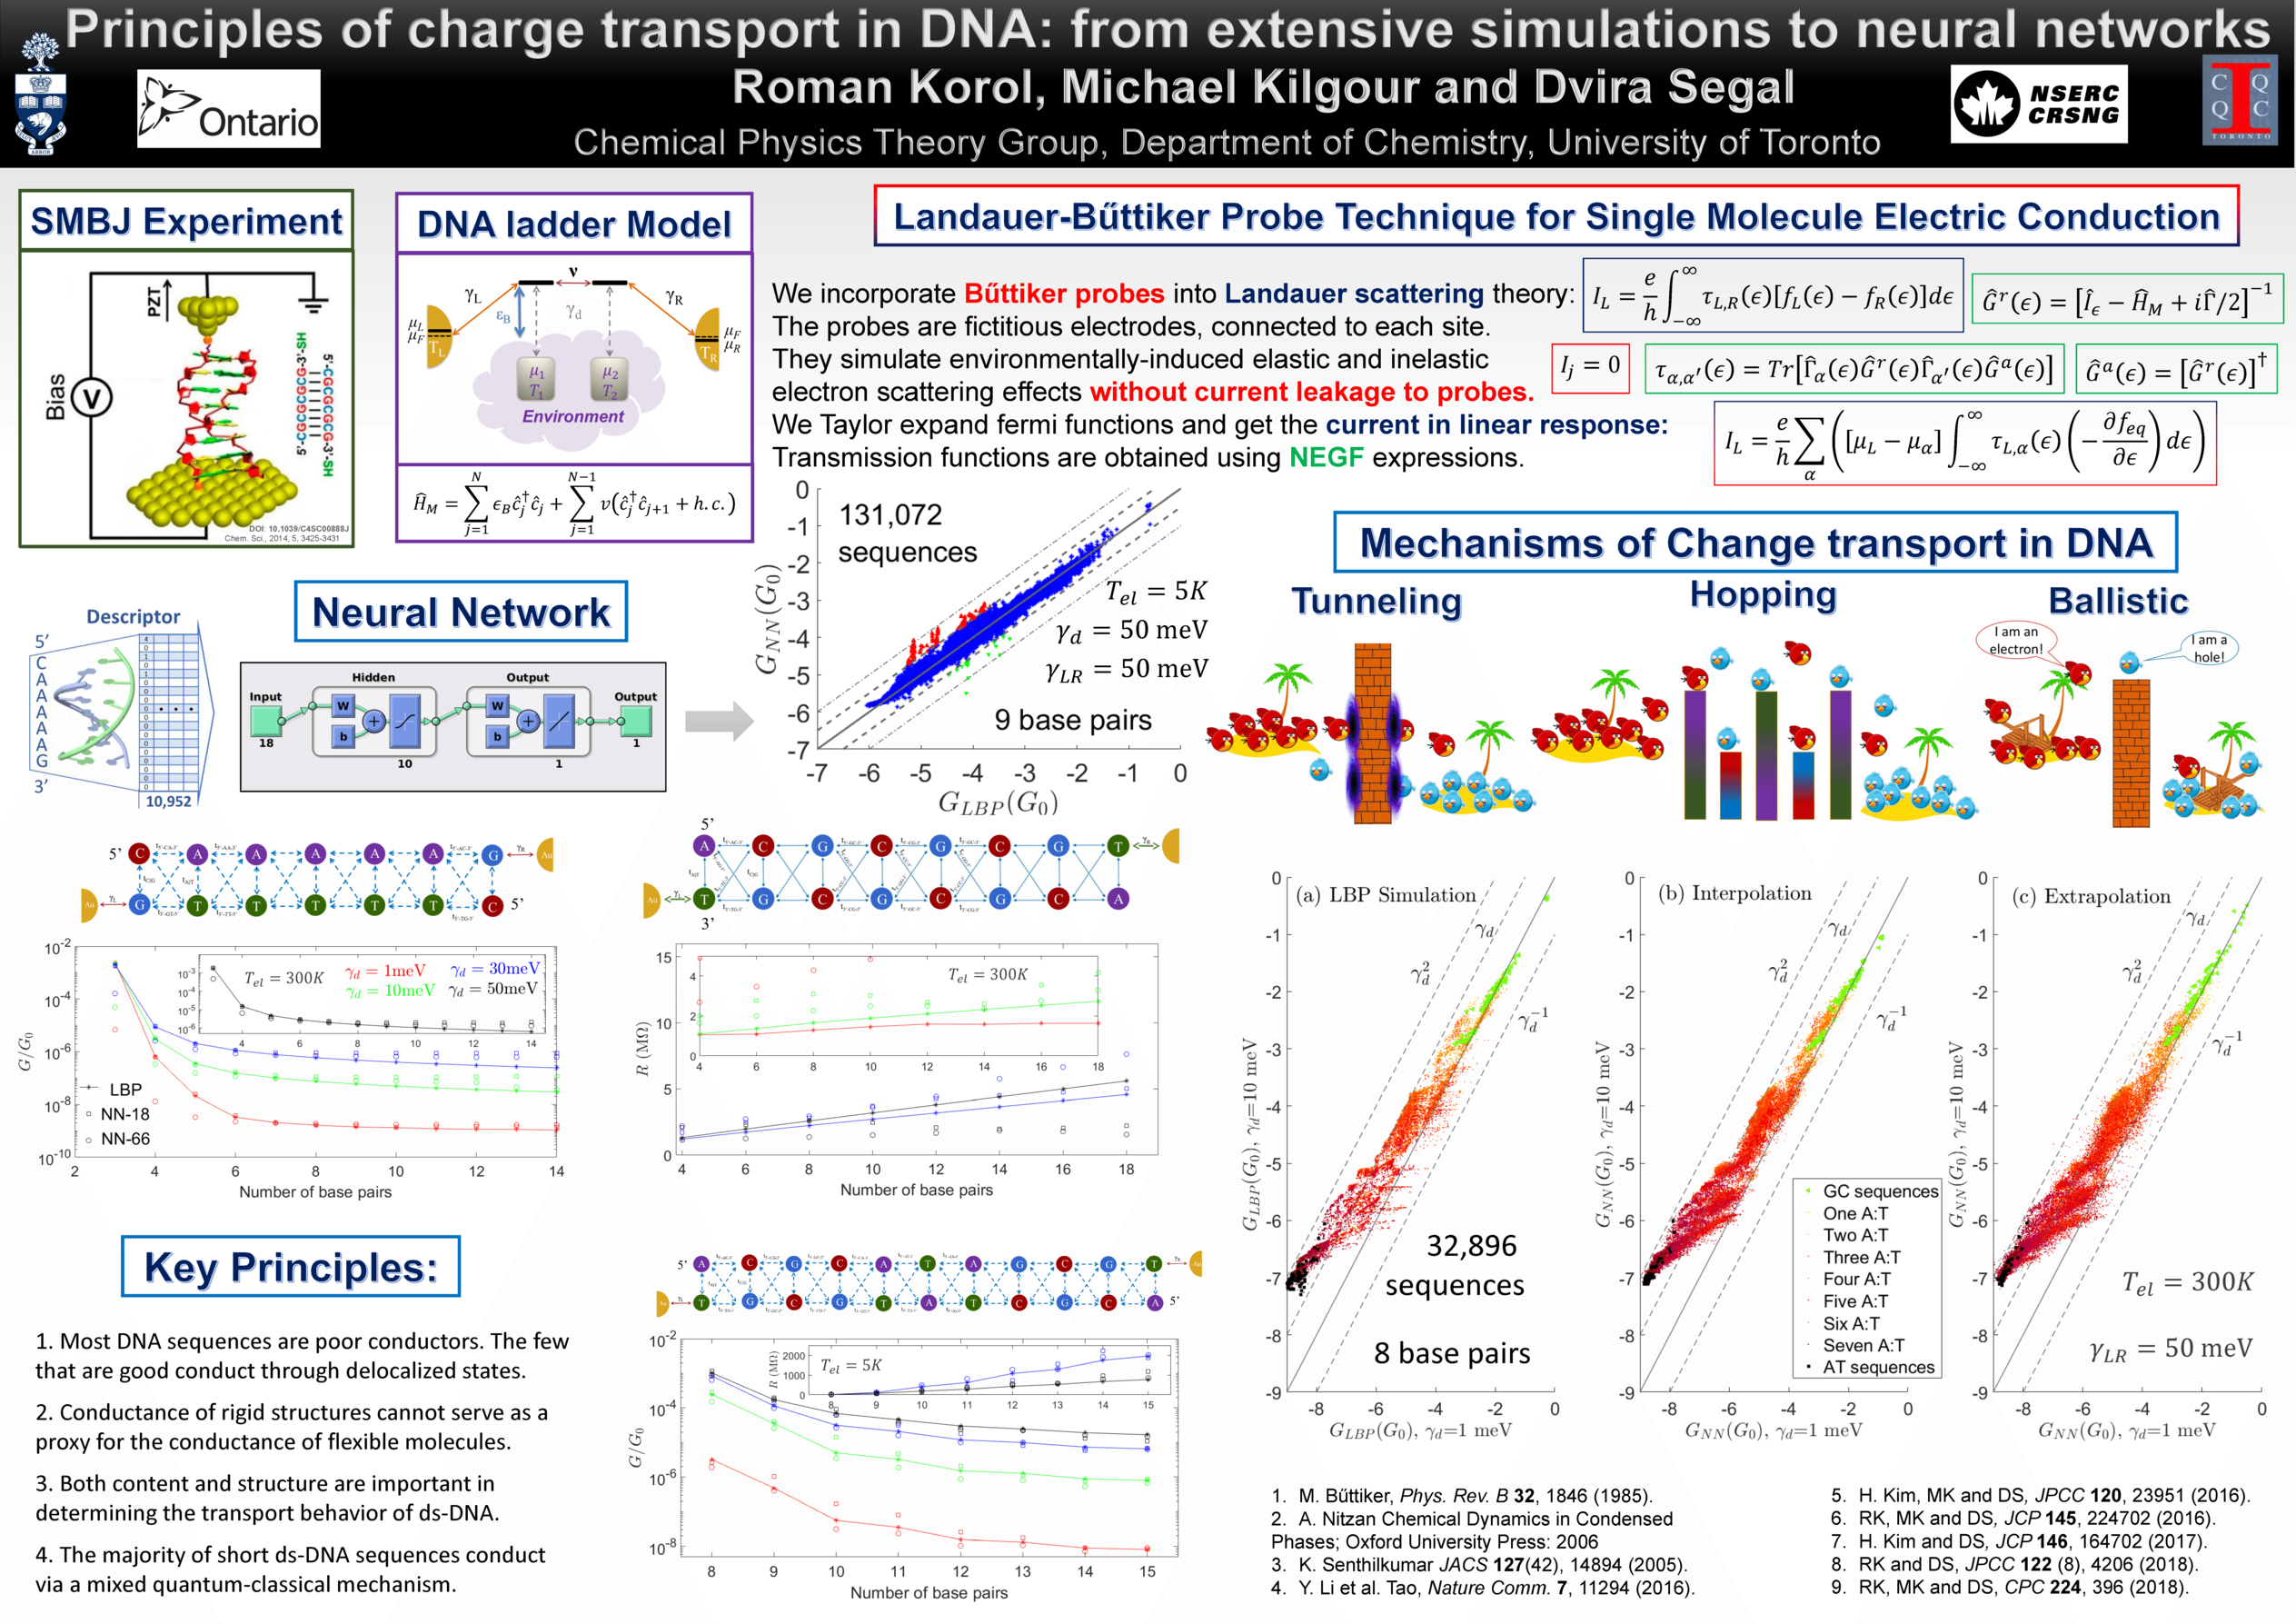 The poster I presented at the meeting on conductance of DNA